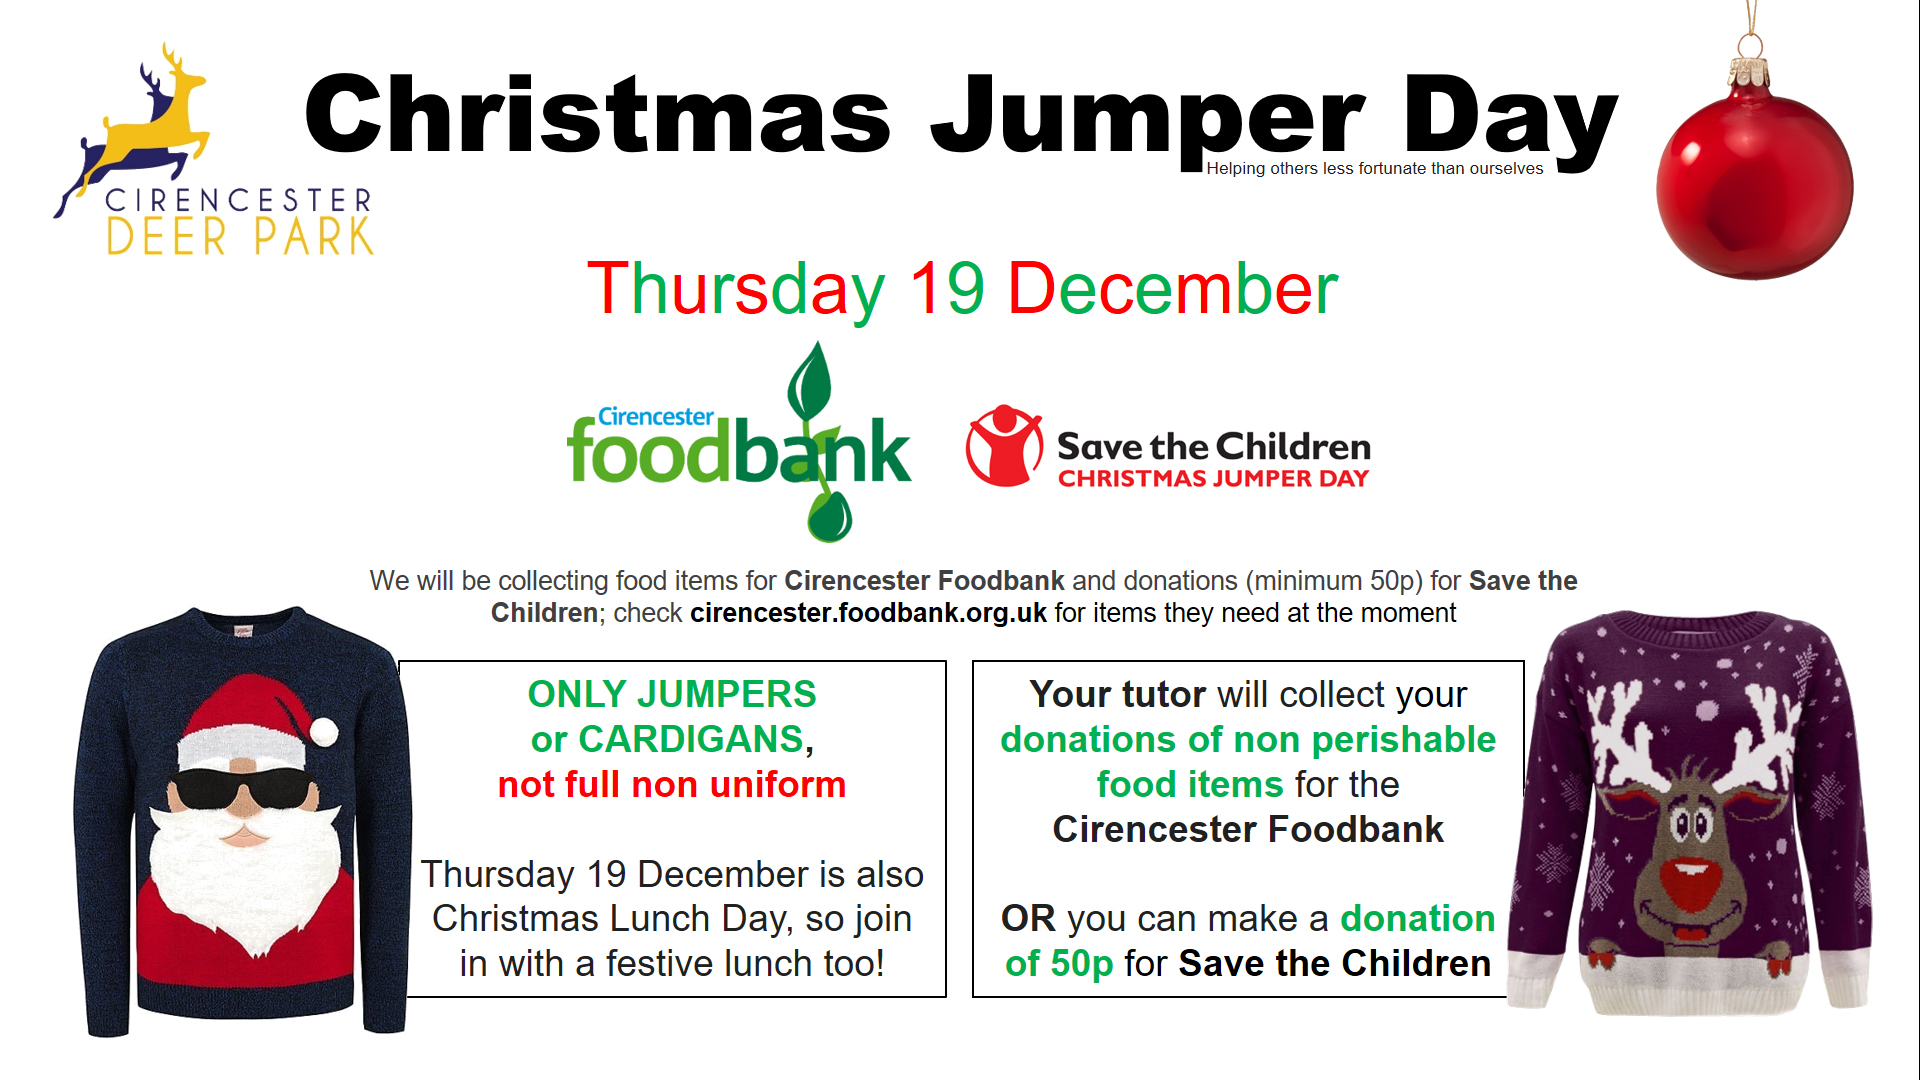 Cirencester Deerpark On Twitter This Thursday Is Christmas Jumper Day Swap Your School Jumper For A Festive Version Tutors Are Collecting Donations For Savechildrenuk At Least 50p And Items For Cirenfoodbank